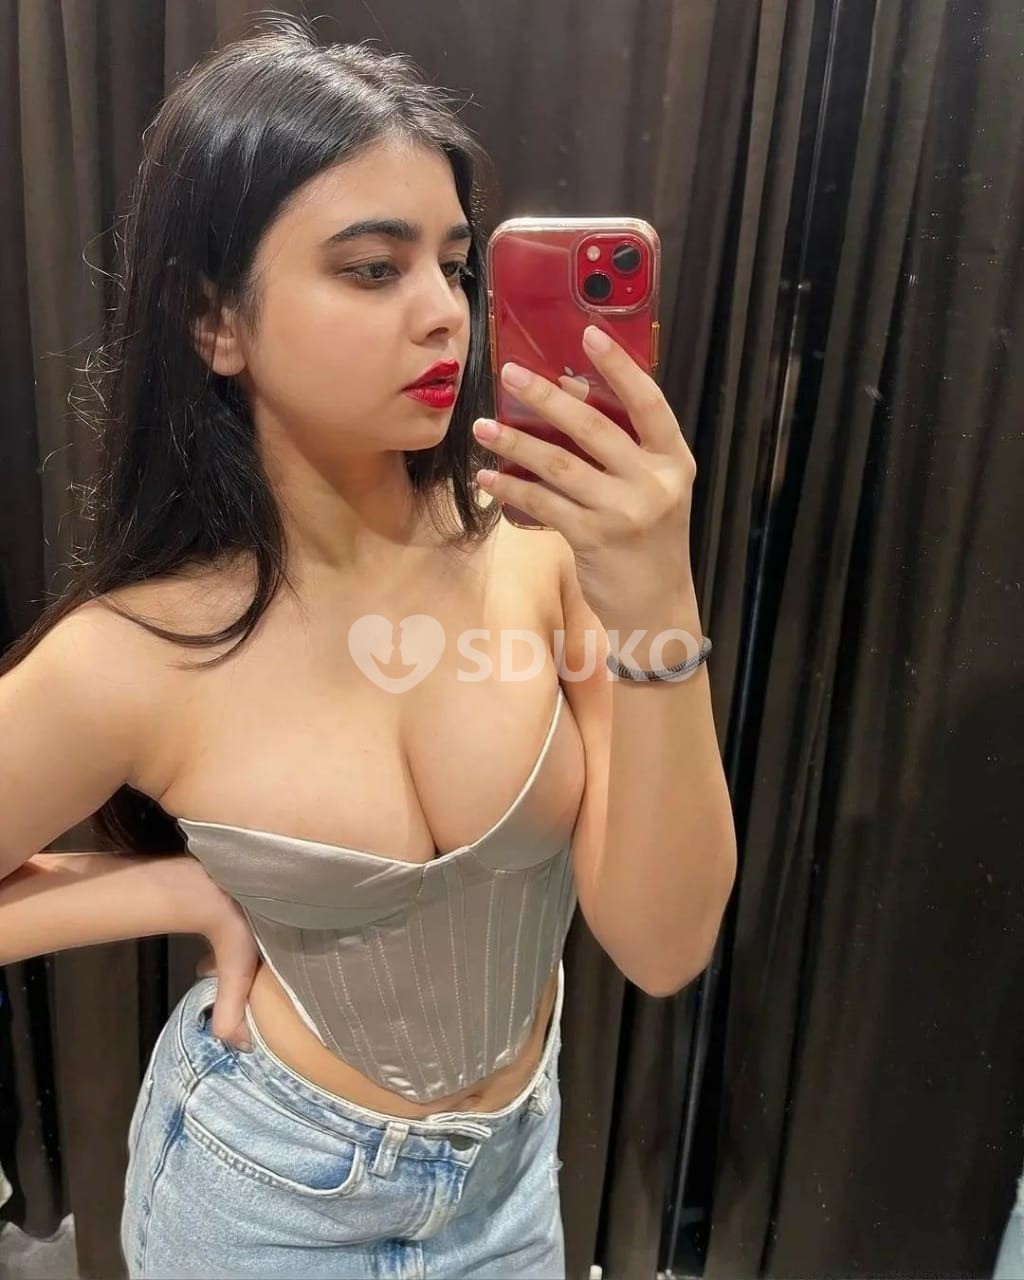 AMRITSAR VIP TODAY LOW :'PRICE ESCORT 🥰SERVICE 100% SAFE AND SECURE ANYTIME CALL ME 24 X 7 SERVICE AVAILABLE 100% SAF